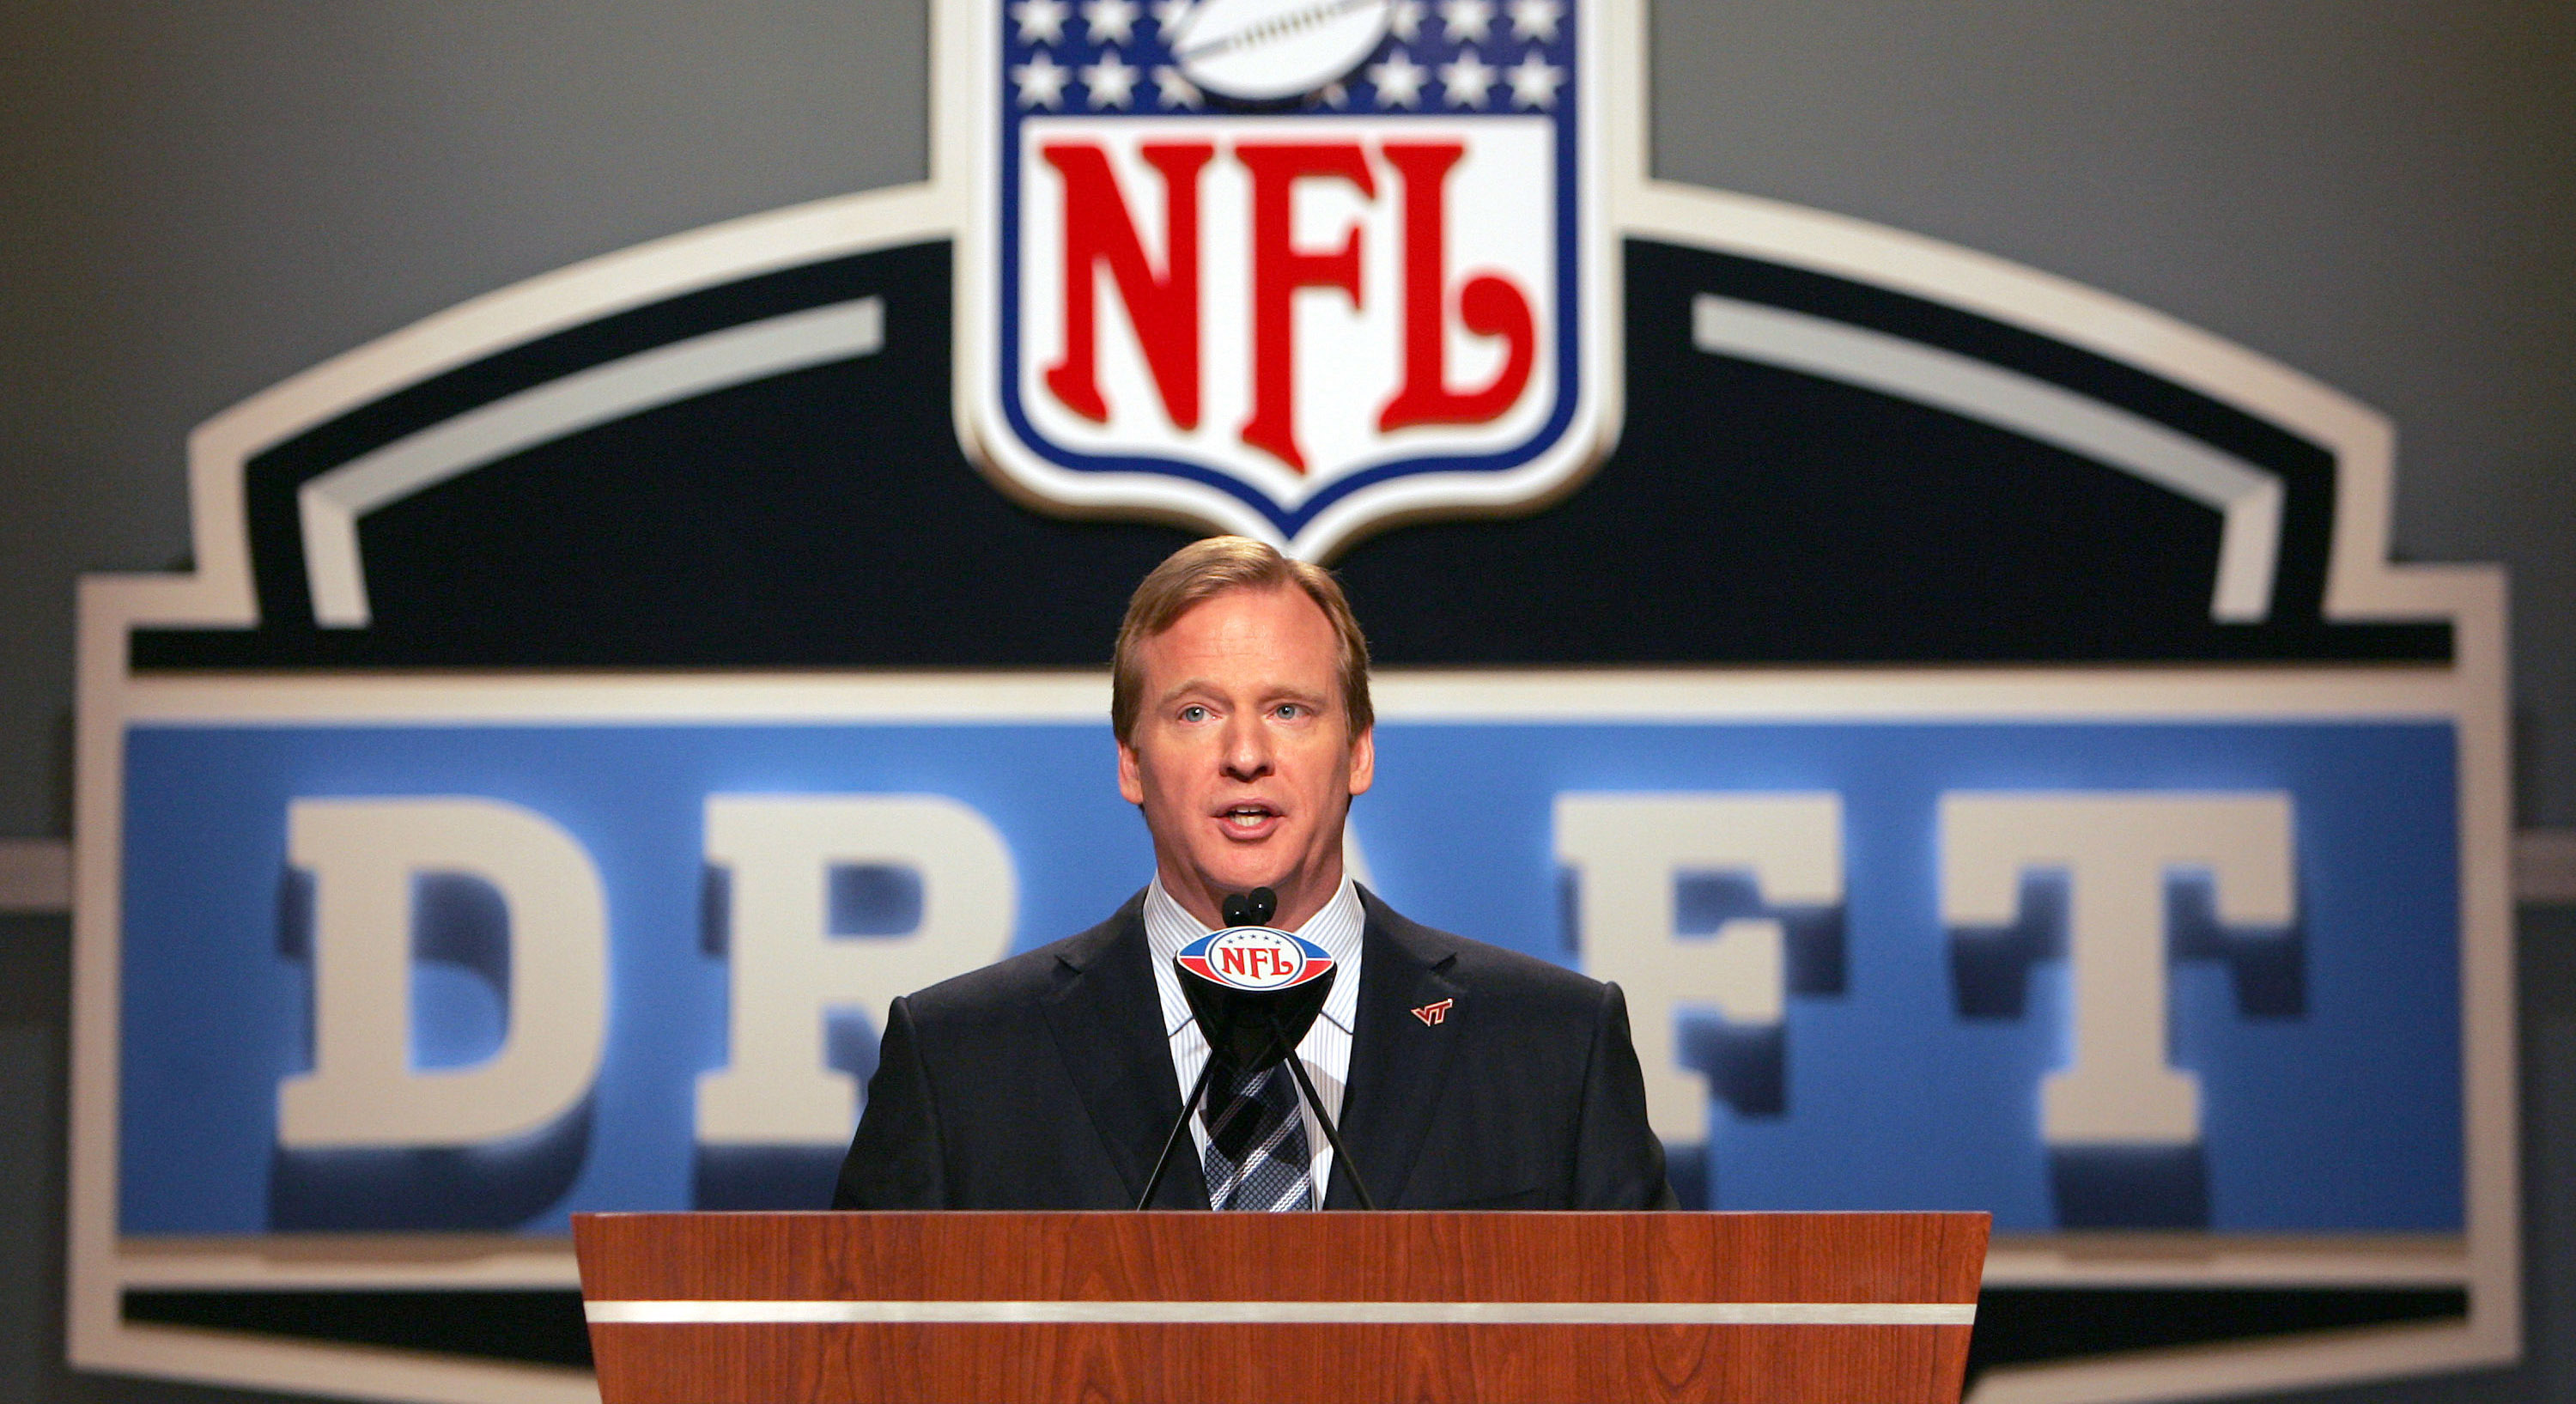 NFL Teams Say They Will Take Players Off Their Draft Boards Over